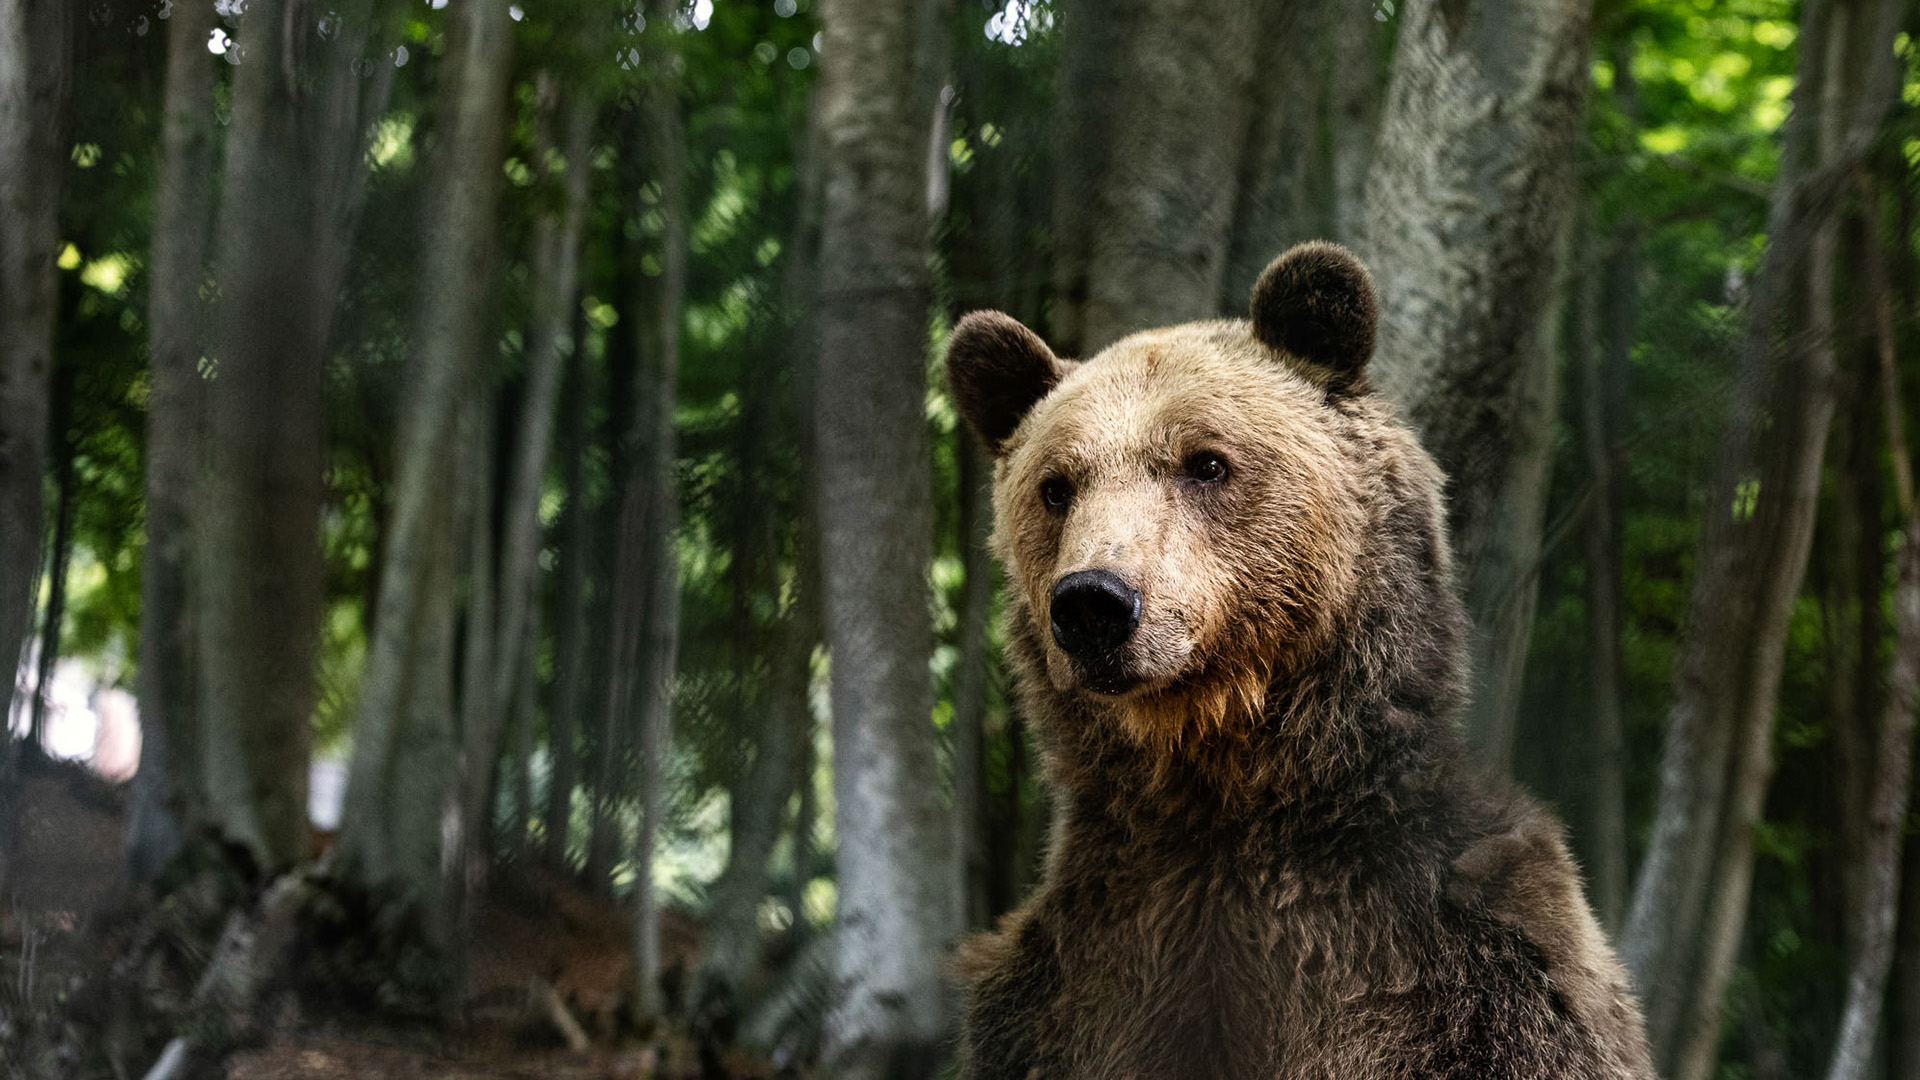 Close up of a brown bear standing tall in a forest